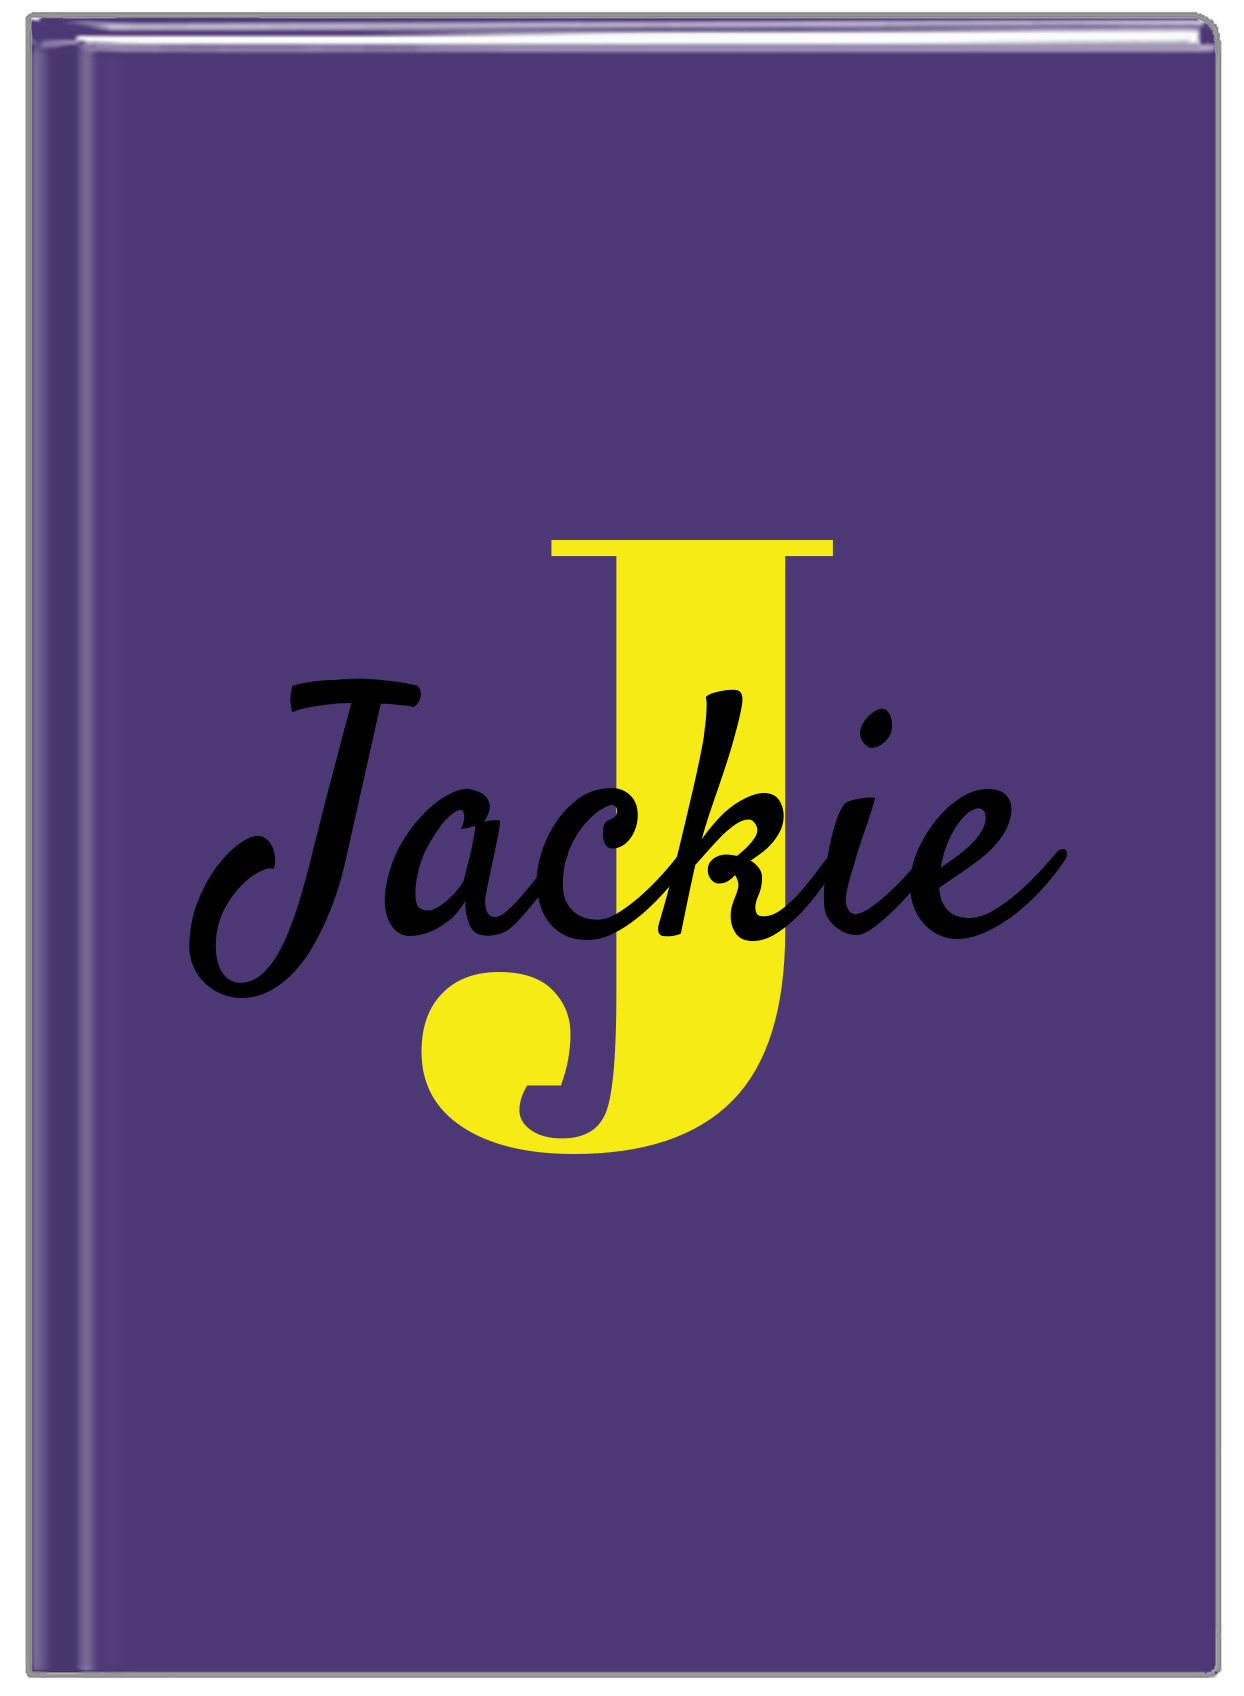 Personalized Solid Color Journal - Purple Background - Name Over Initial - Front View